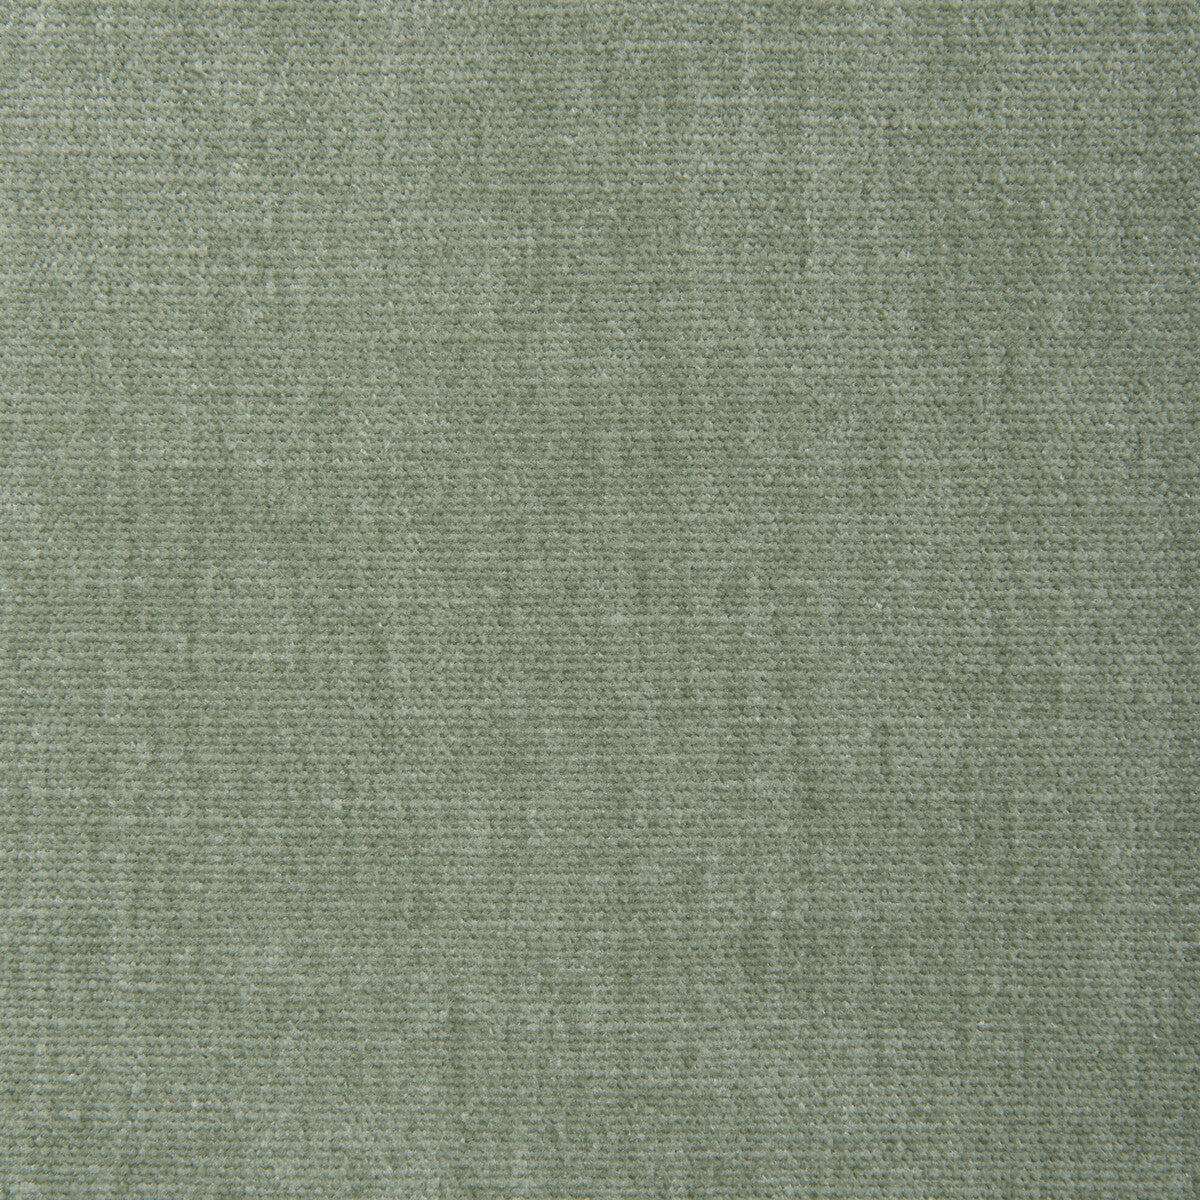 Kravet Smart fabric in 36076-130 color - pattern 36076.130.0 - by Kravet Smart in the Sumptuous Chenille II collection